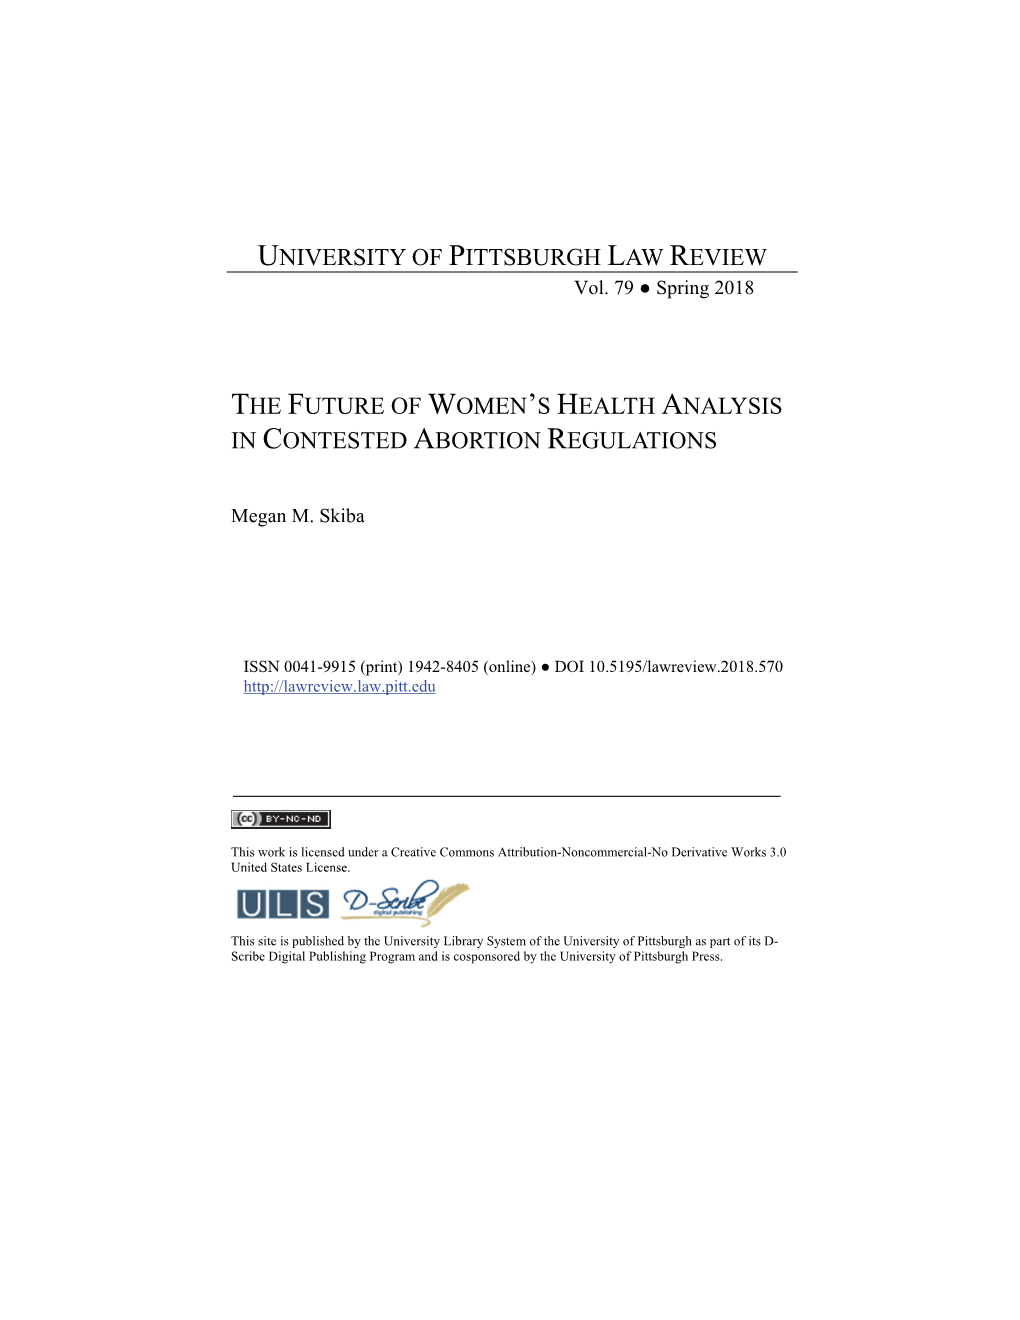 The Future of Women's Health Analysis in Contested